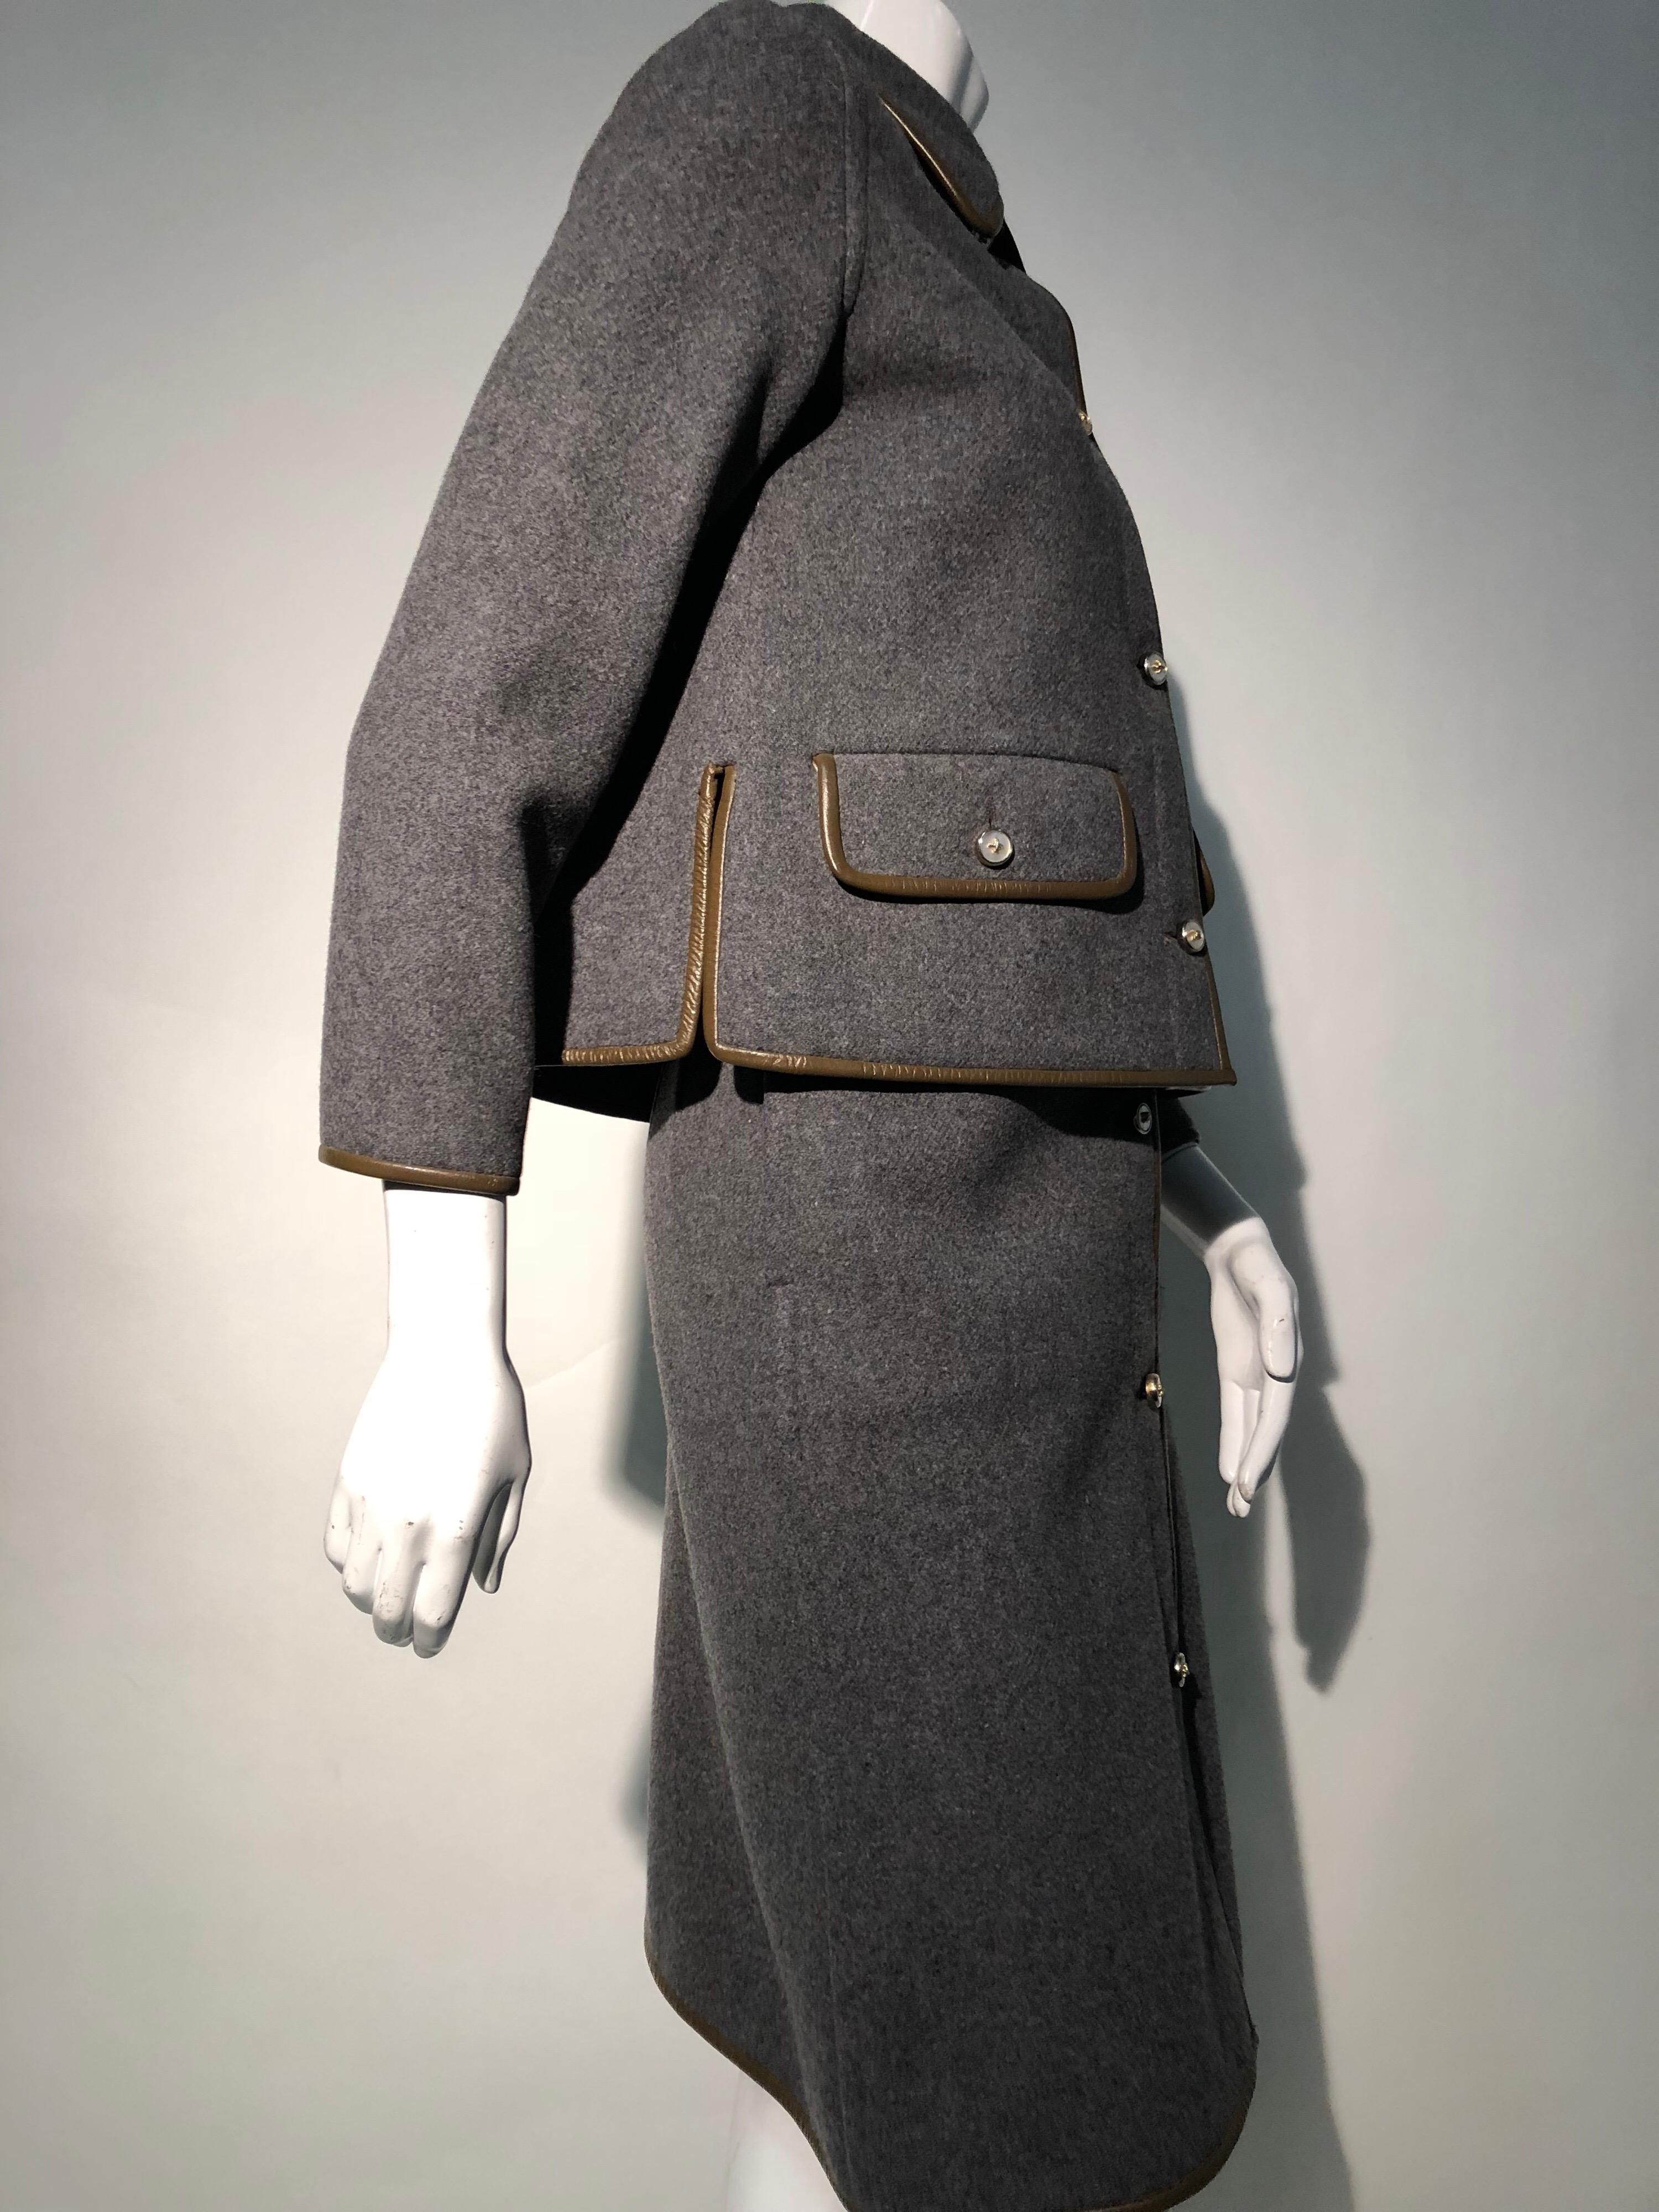 1960s Sills By Bonnie Cashin Mod Gray Wool Skirt Suit W/ Brown Leather Trim For Sale 1